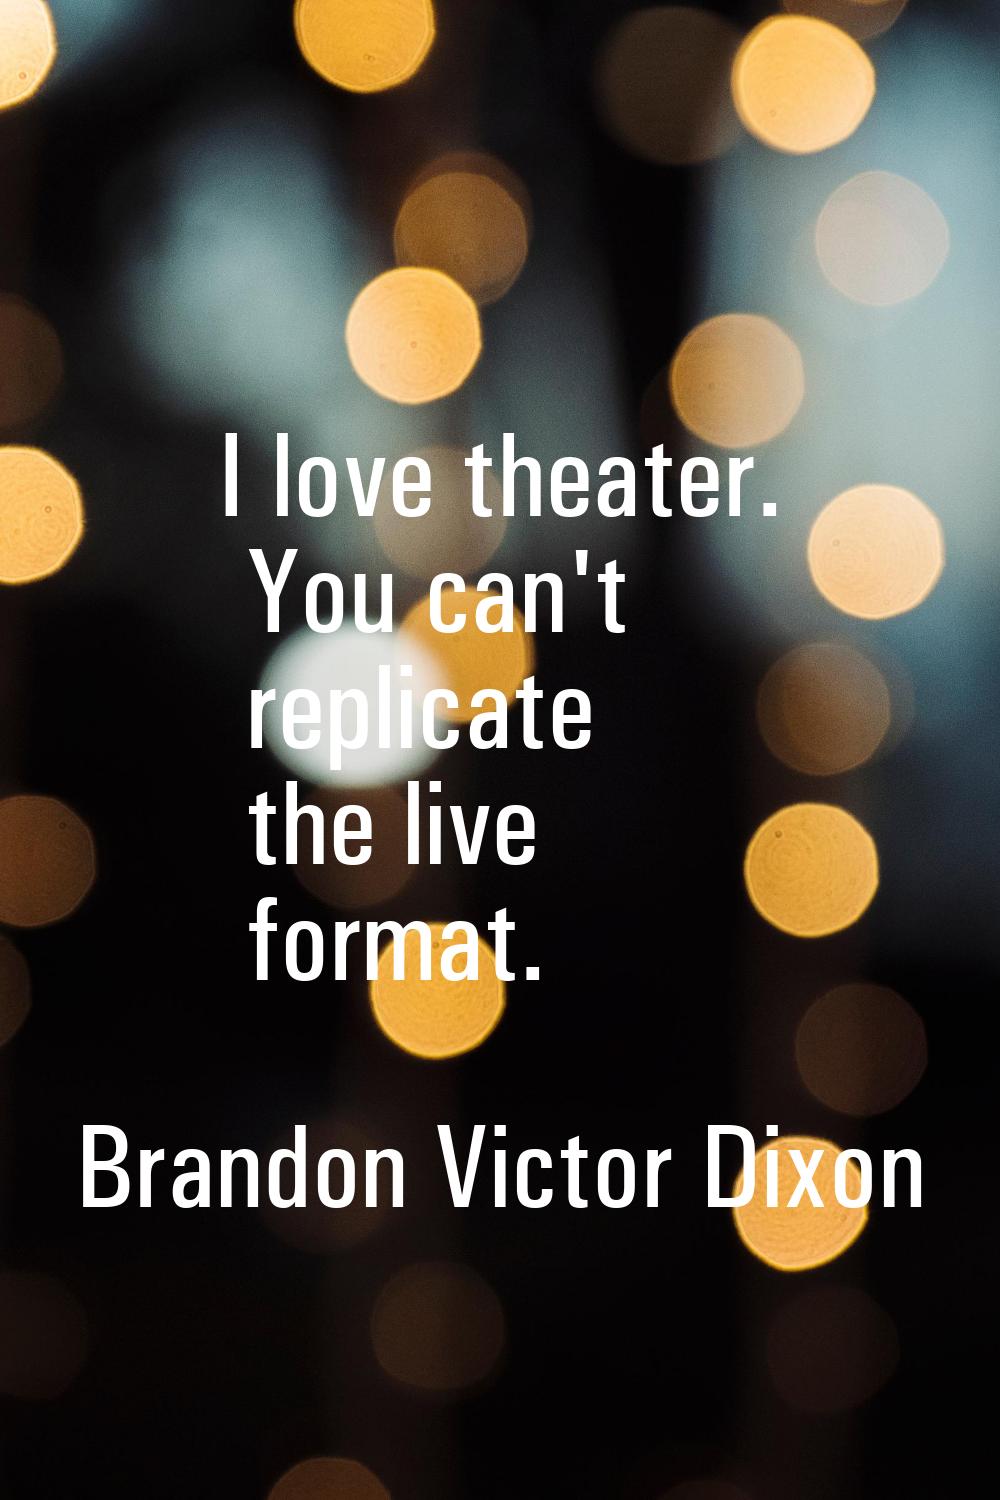 I love theater. You can't replicate the live format.